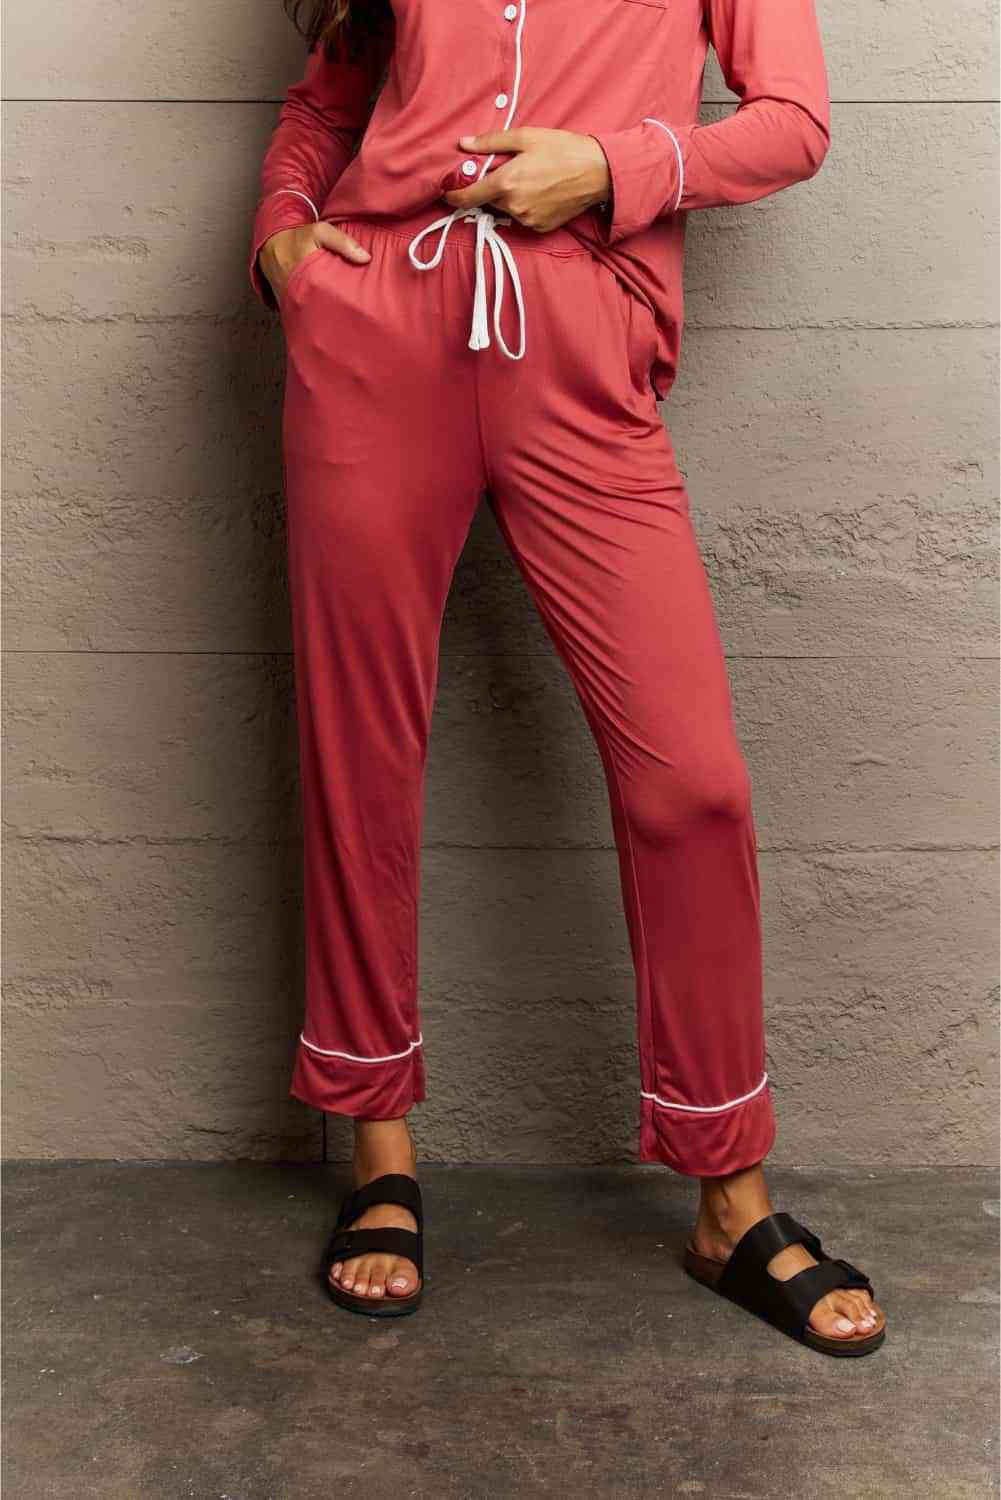 Ninexis Buttoned Collared Neck Top and Pants Pajama Set - EMMY